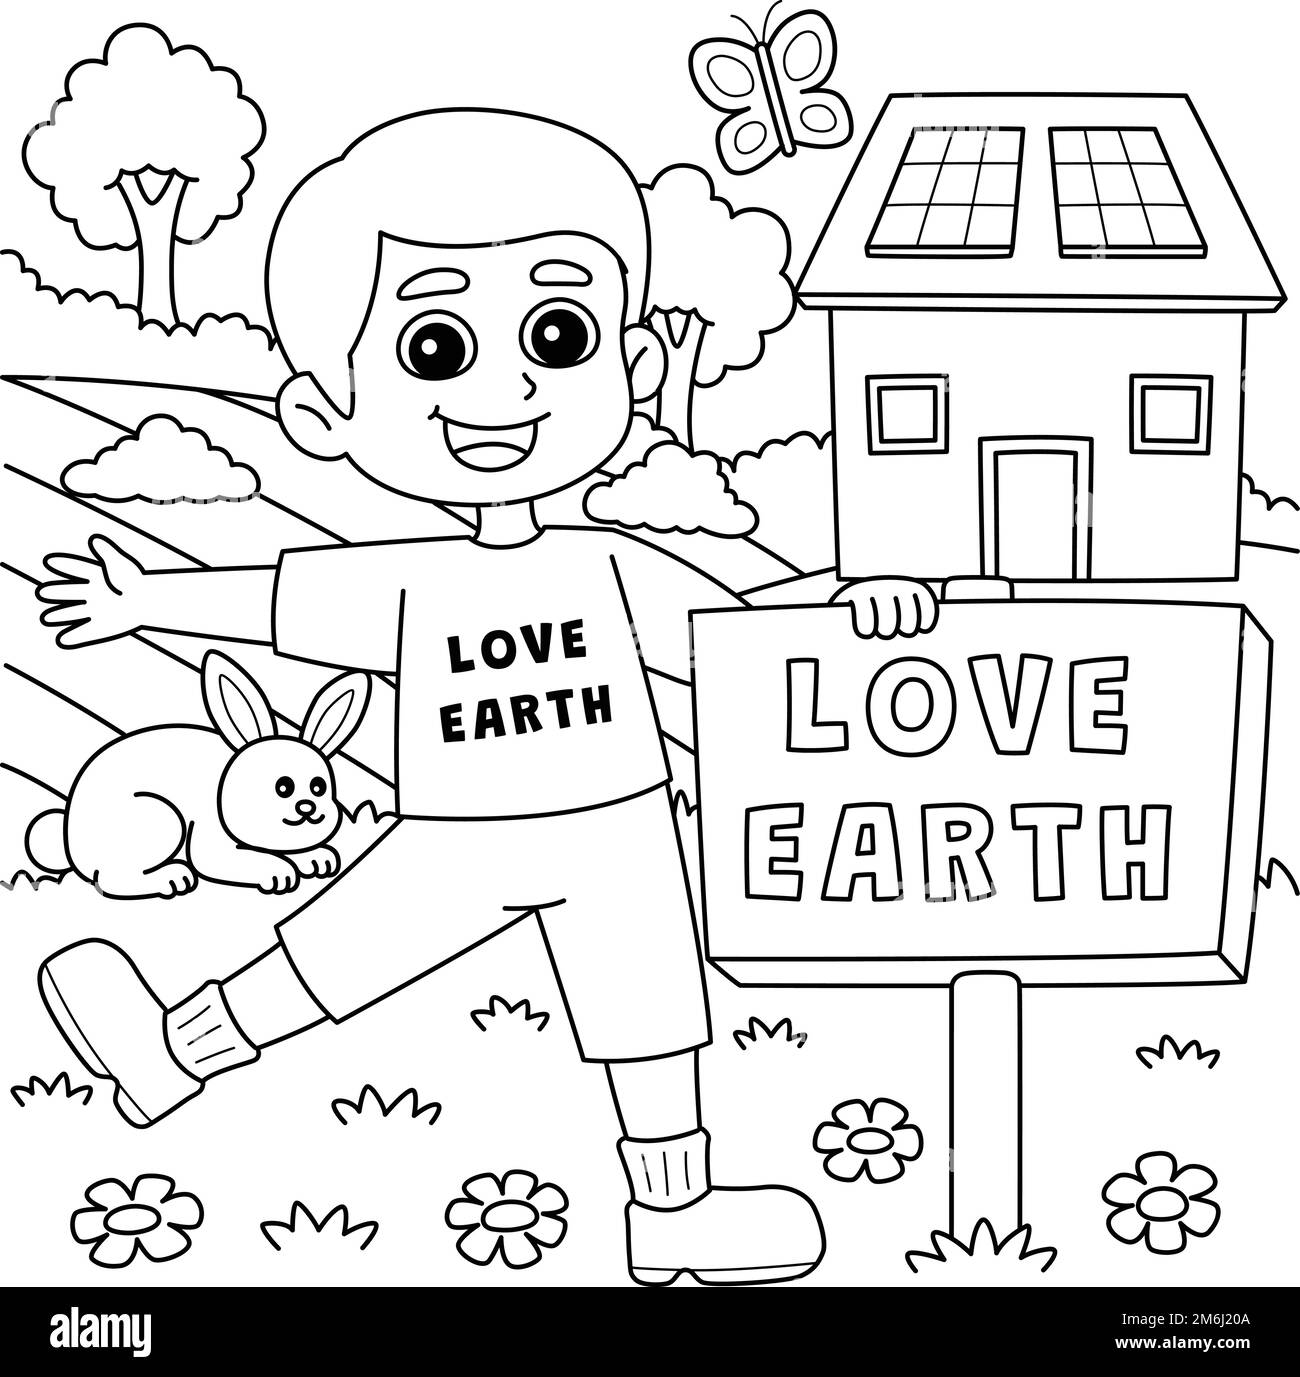 Boy Holding a Love Earth Sign Coloring Page  Stock Vector